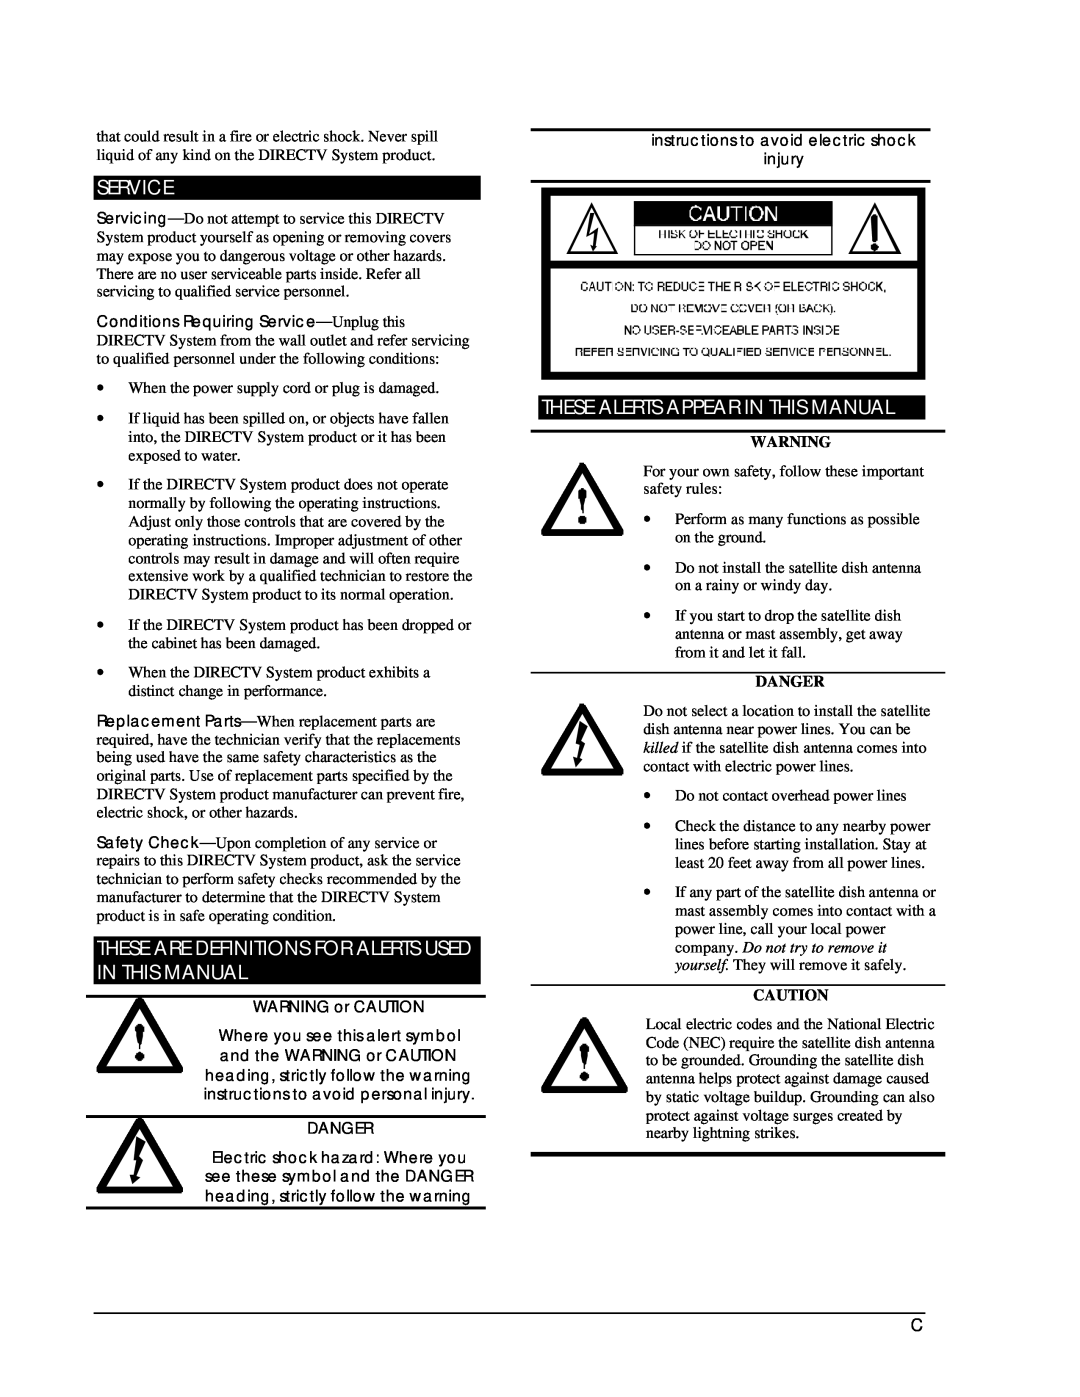 DirecTV HIRD-D01, HIRD-D11 owner manual Service, These Alerts Appear In This Manual, Danger 